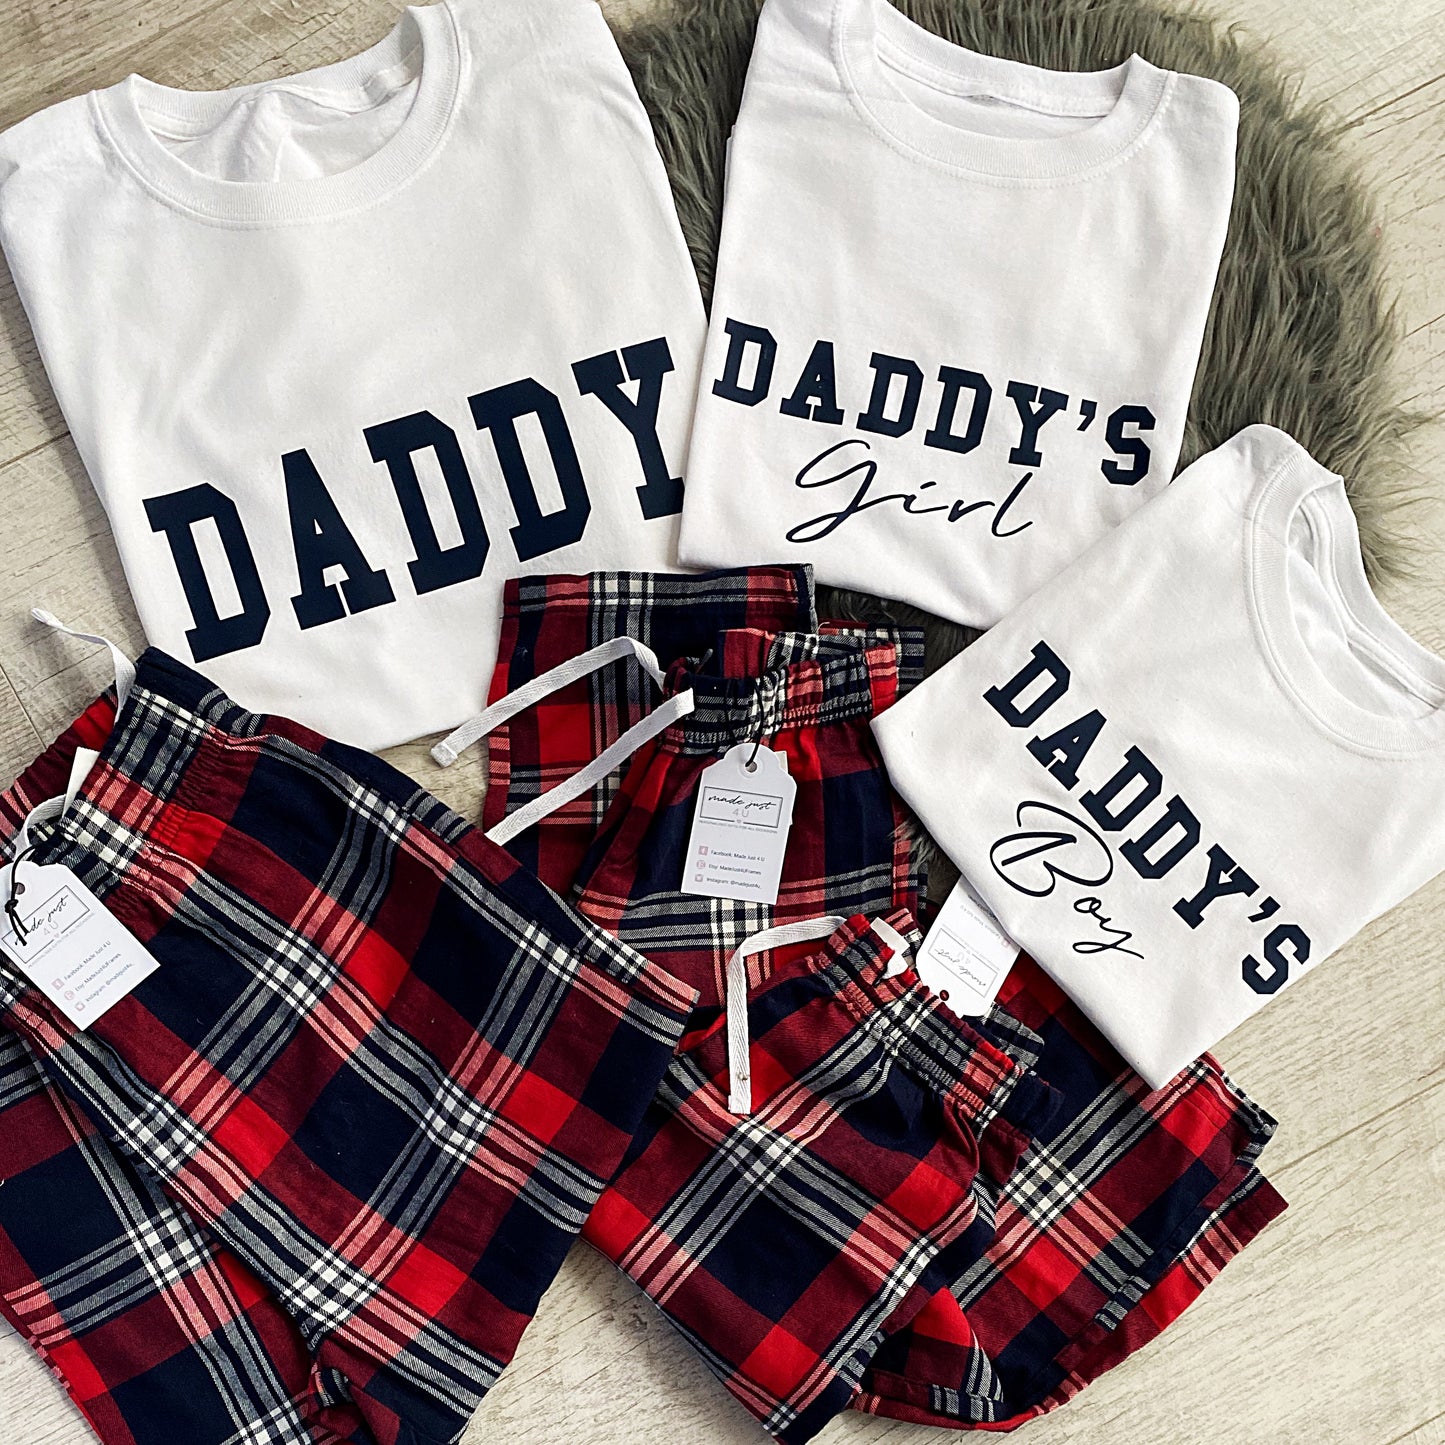 Daddy, Daughter & Son Pyjamas | FAMILY Lounge Personalised Family Pyjamas ALL SIZES | Sleepover Goals matching pjs Daddy Daughter pjs